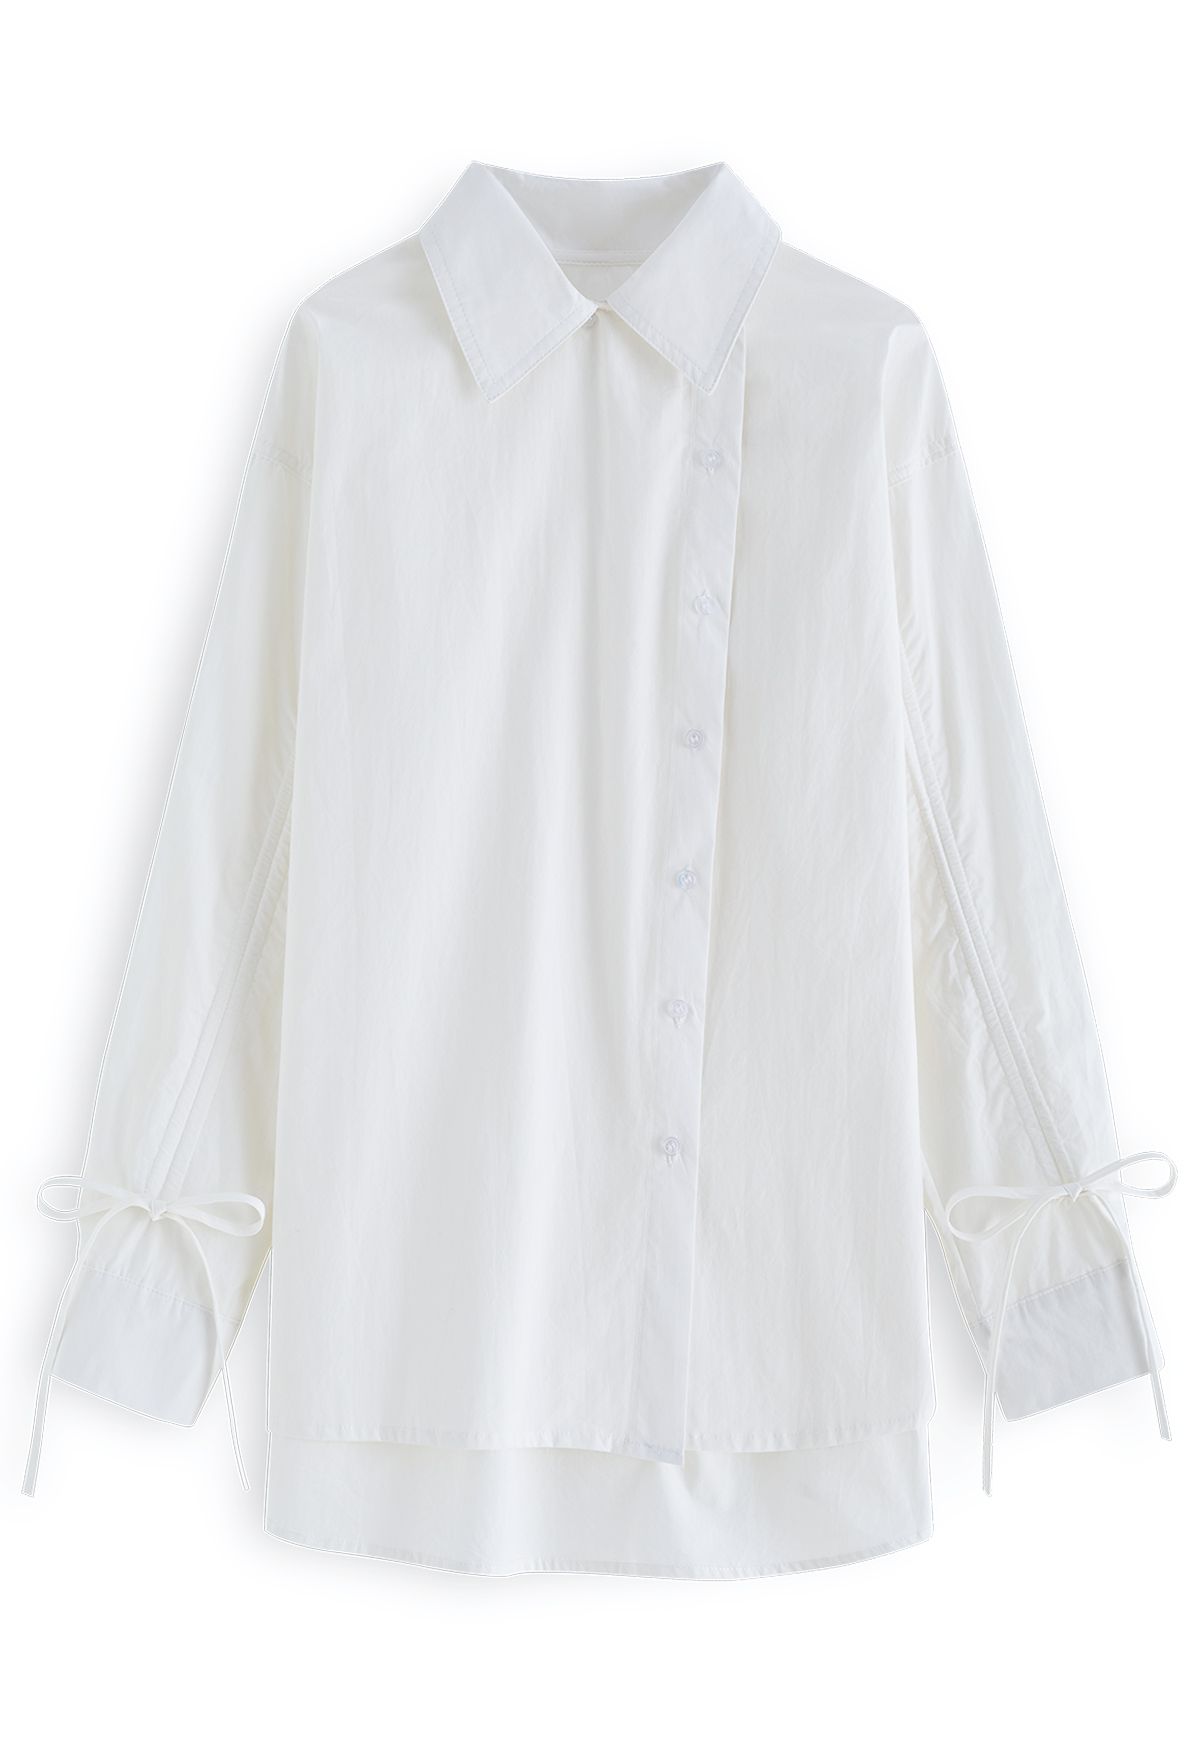 Drawstring Sleeves Button Down Cotton Shirt in White